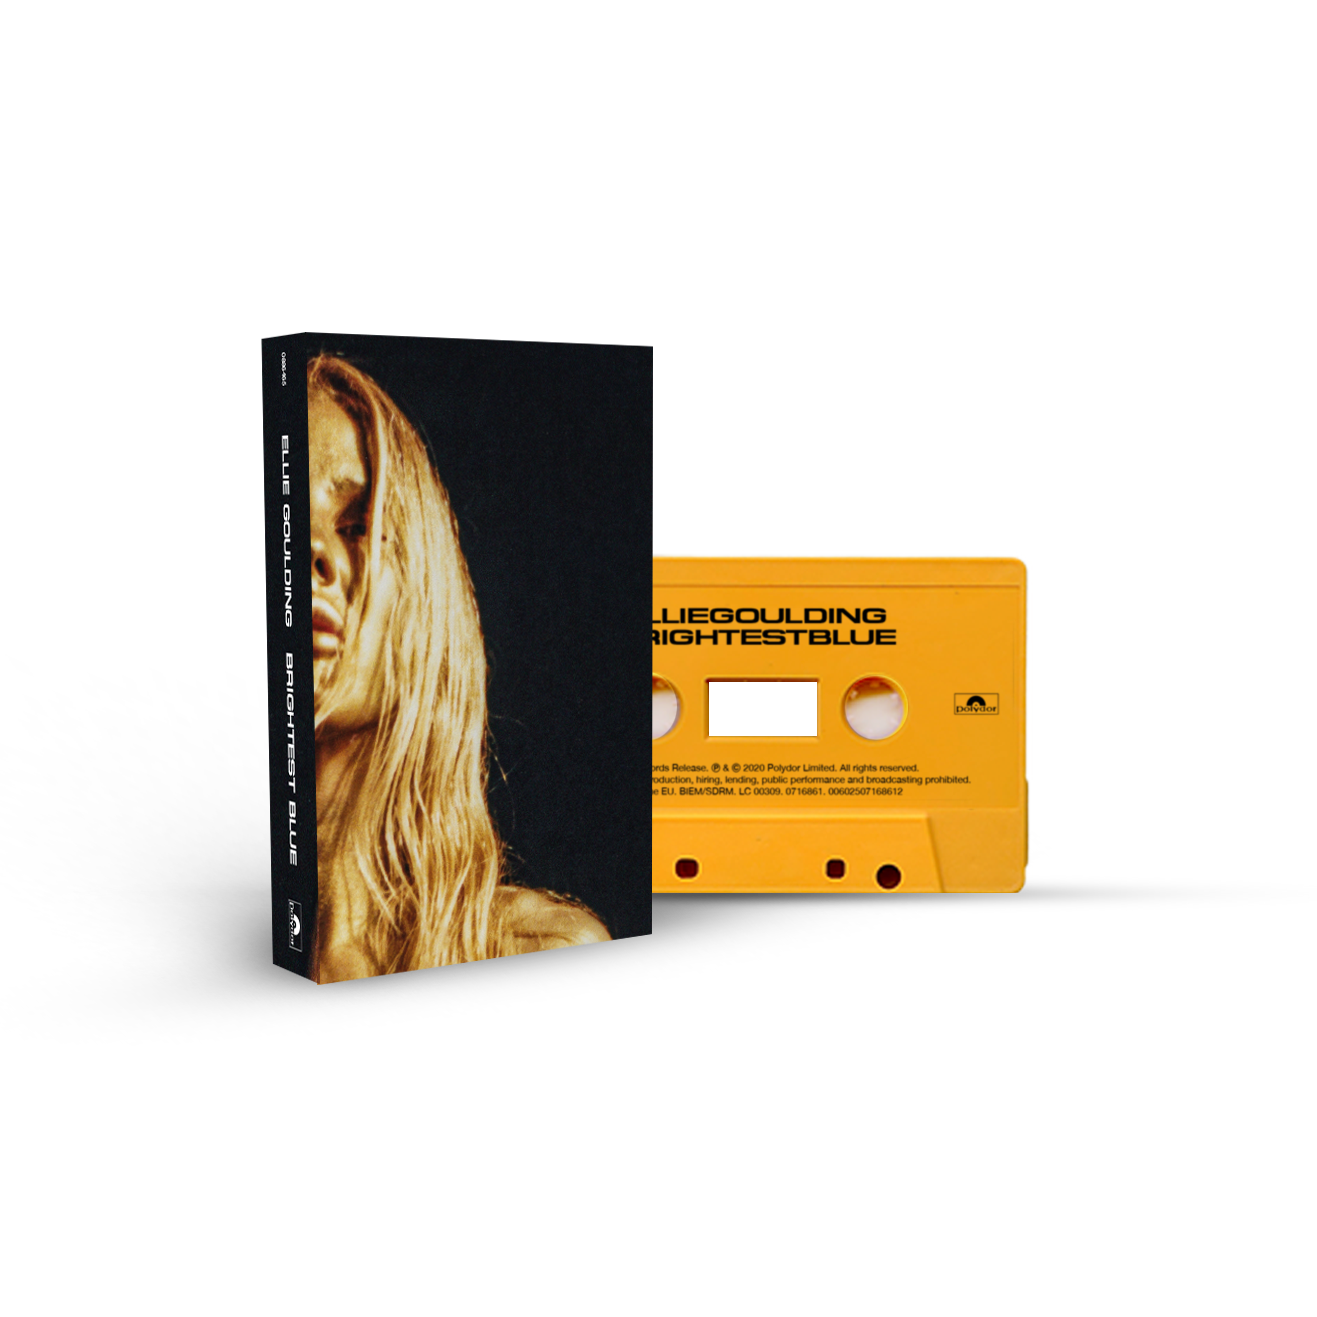 Ellie Goulding - Brightest Blue: Recycled Apricot Plastic Cassette